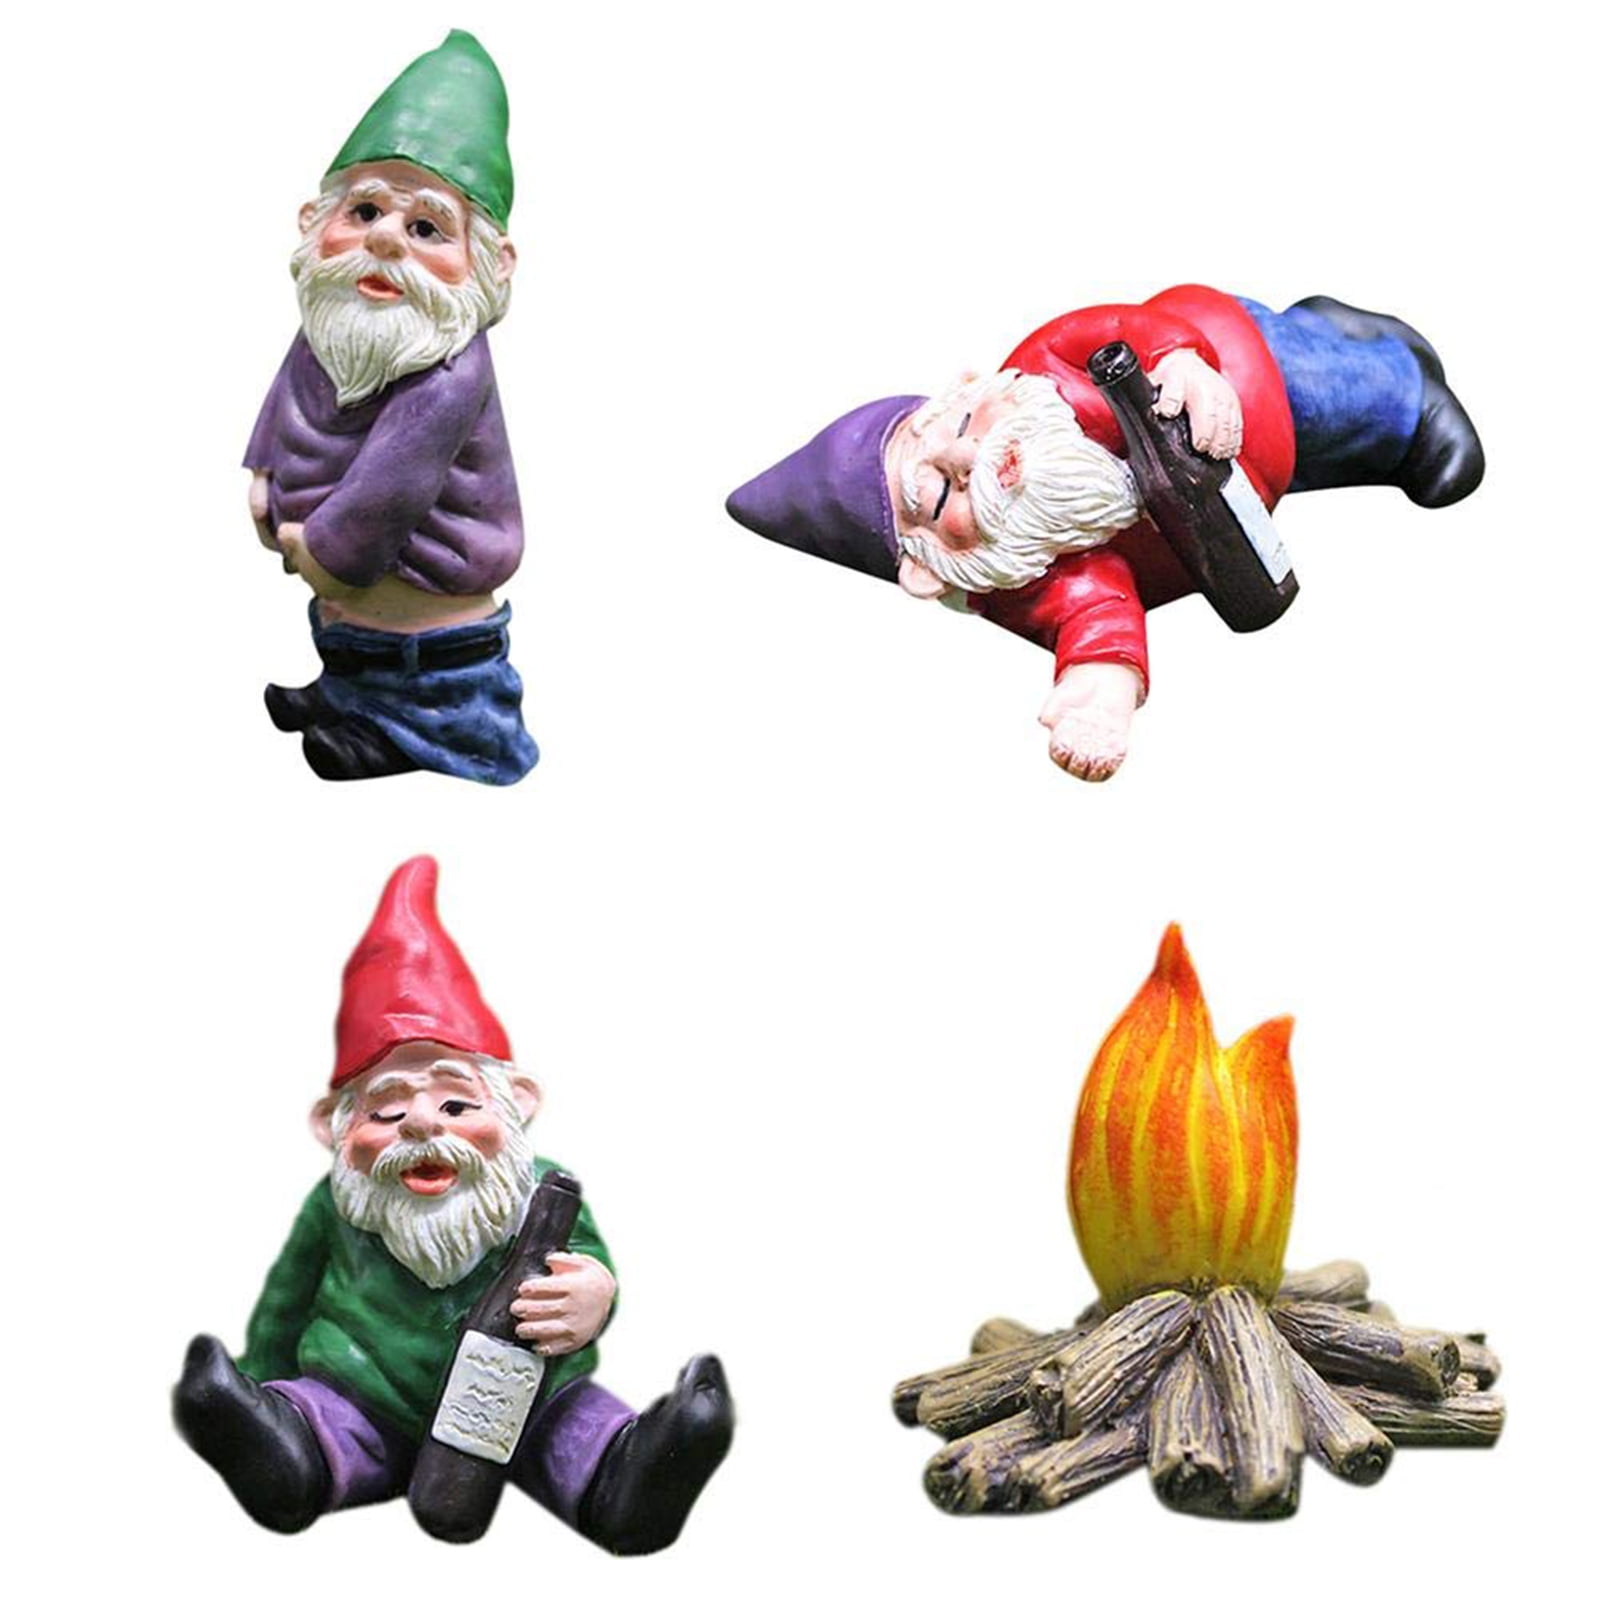 Mini Garden Gnome Statue 4 Pack Fairy Garden Accessories Collectible Figurines Funny Resin Peeing Dwarf Drunk Gnomes Kit for Patio Yard Lawn Ornaments Indoor Outdoor Home Decorations Crafts